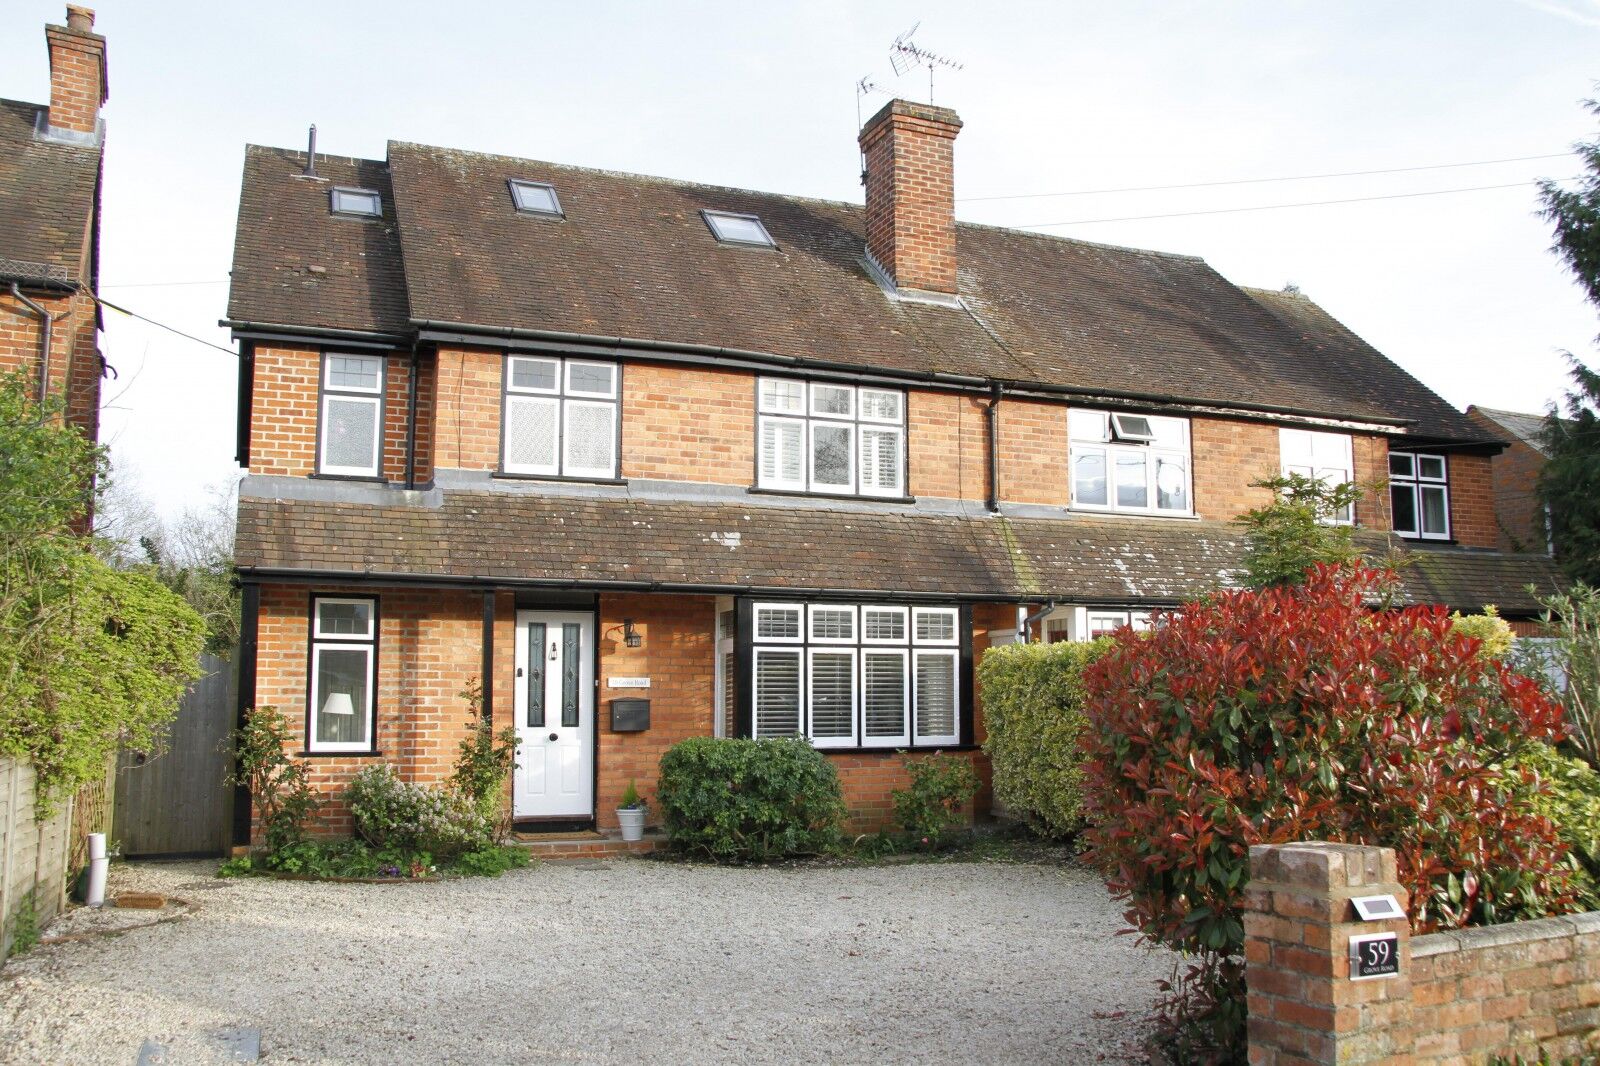 4 bedroom semi detached house for sale Grove Road, Sonning Common, RG4, main image